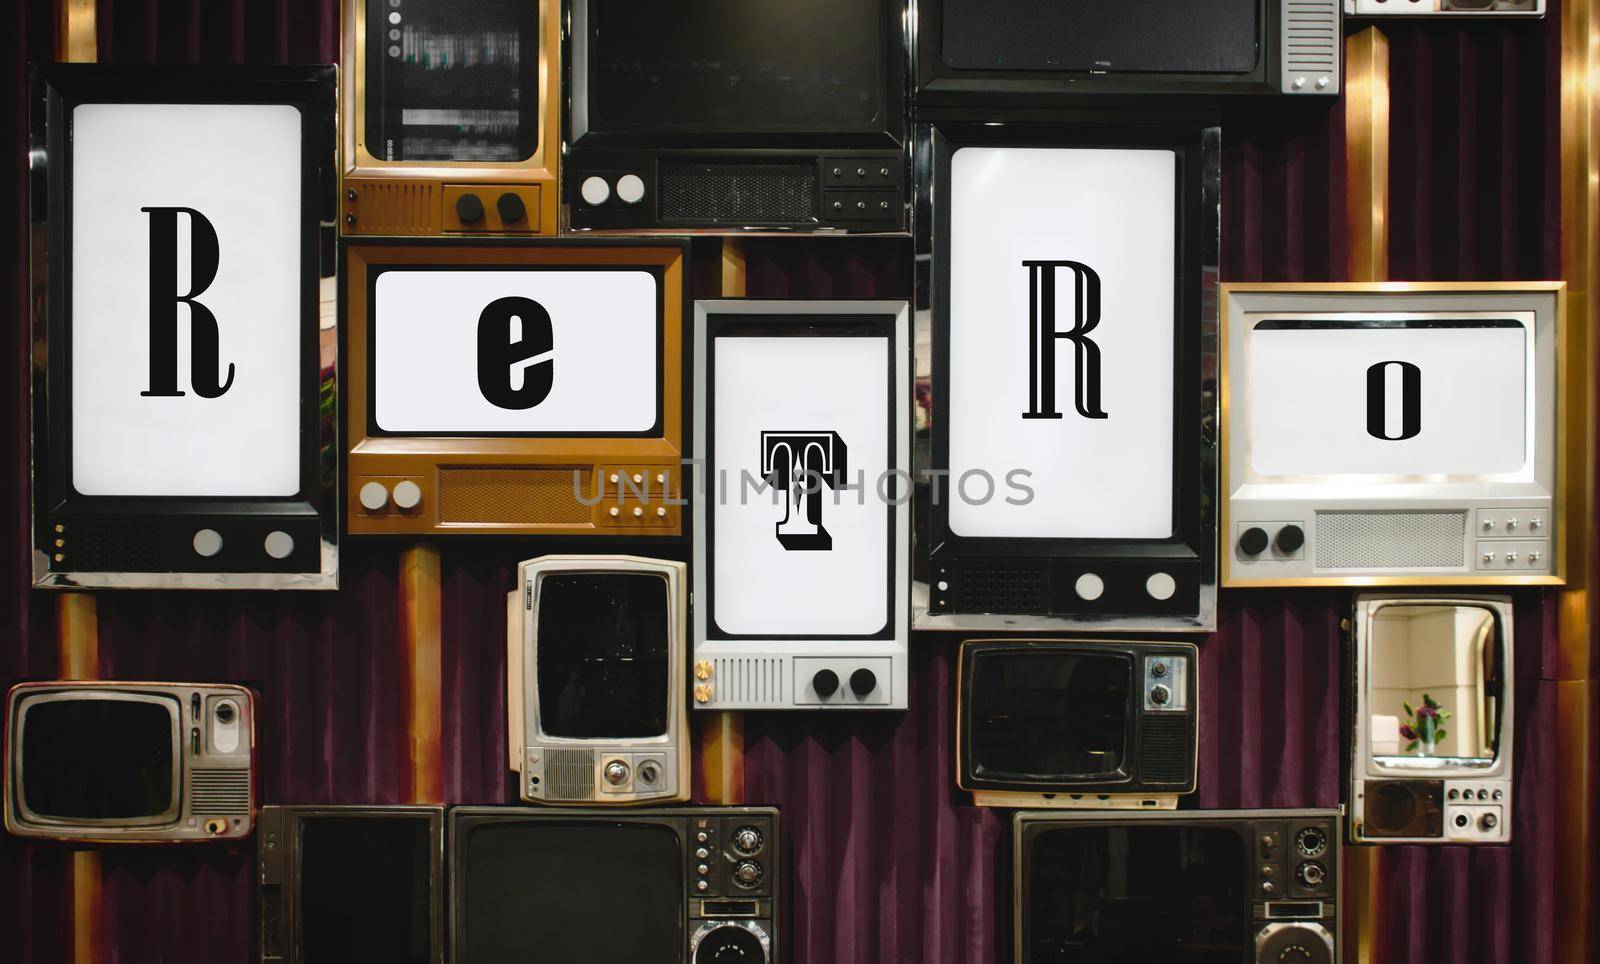 Wall mounted old-fashioned vintage tv screens displaying letters forming the word retro